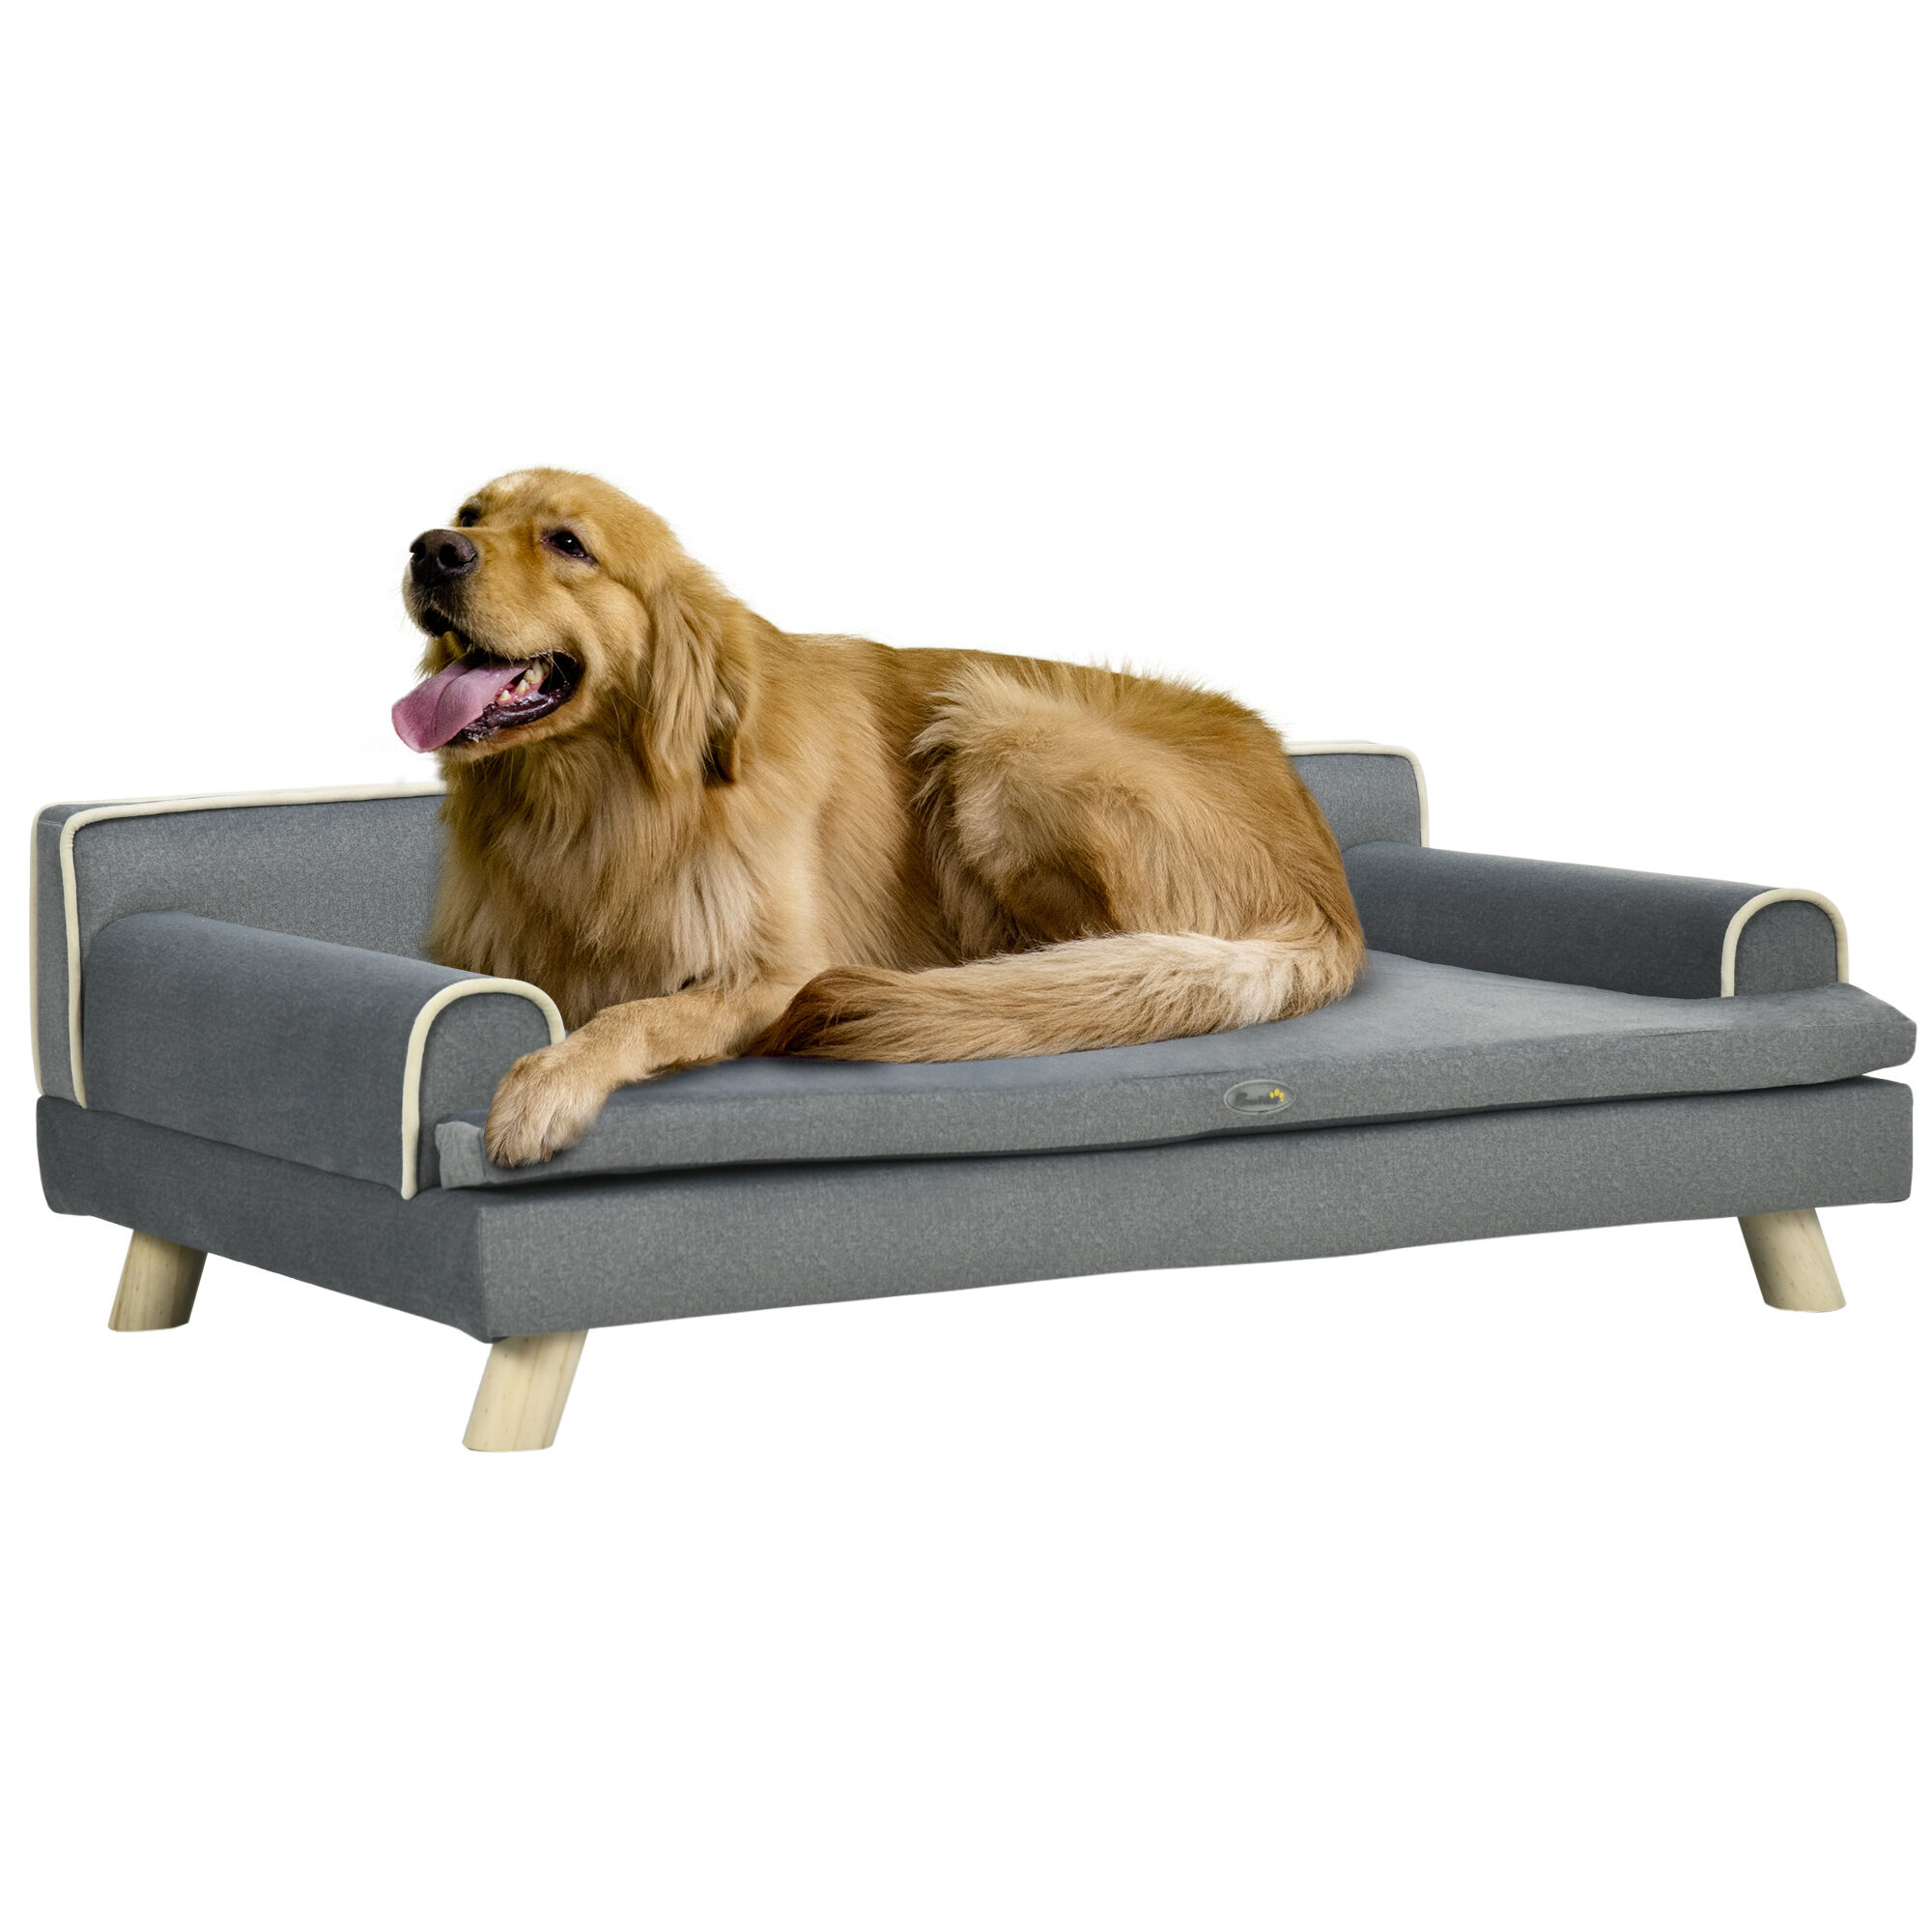 PawHut Pet Sofa for Large, Medium Dogs, Dog Couch with Water-resistant Fabric, Wooden Legs, Washable Cushion, Grey, 39" x 24.5" x 12.5"